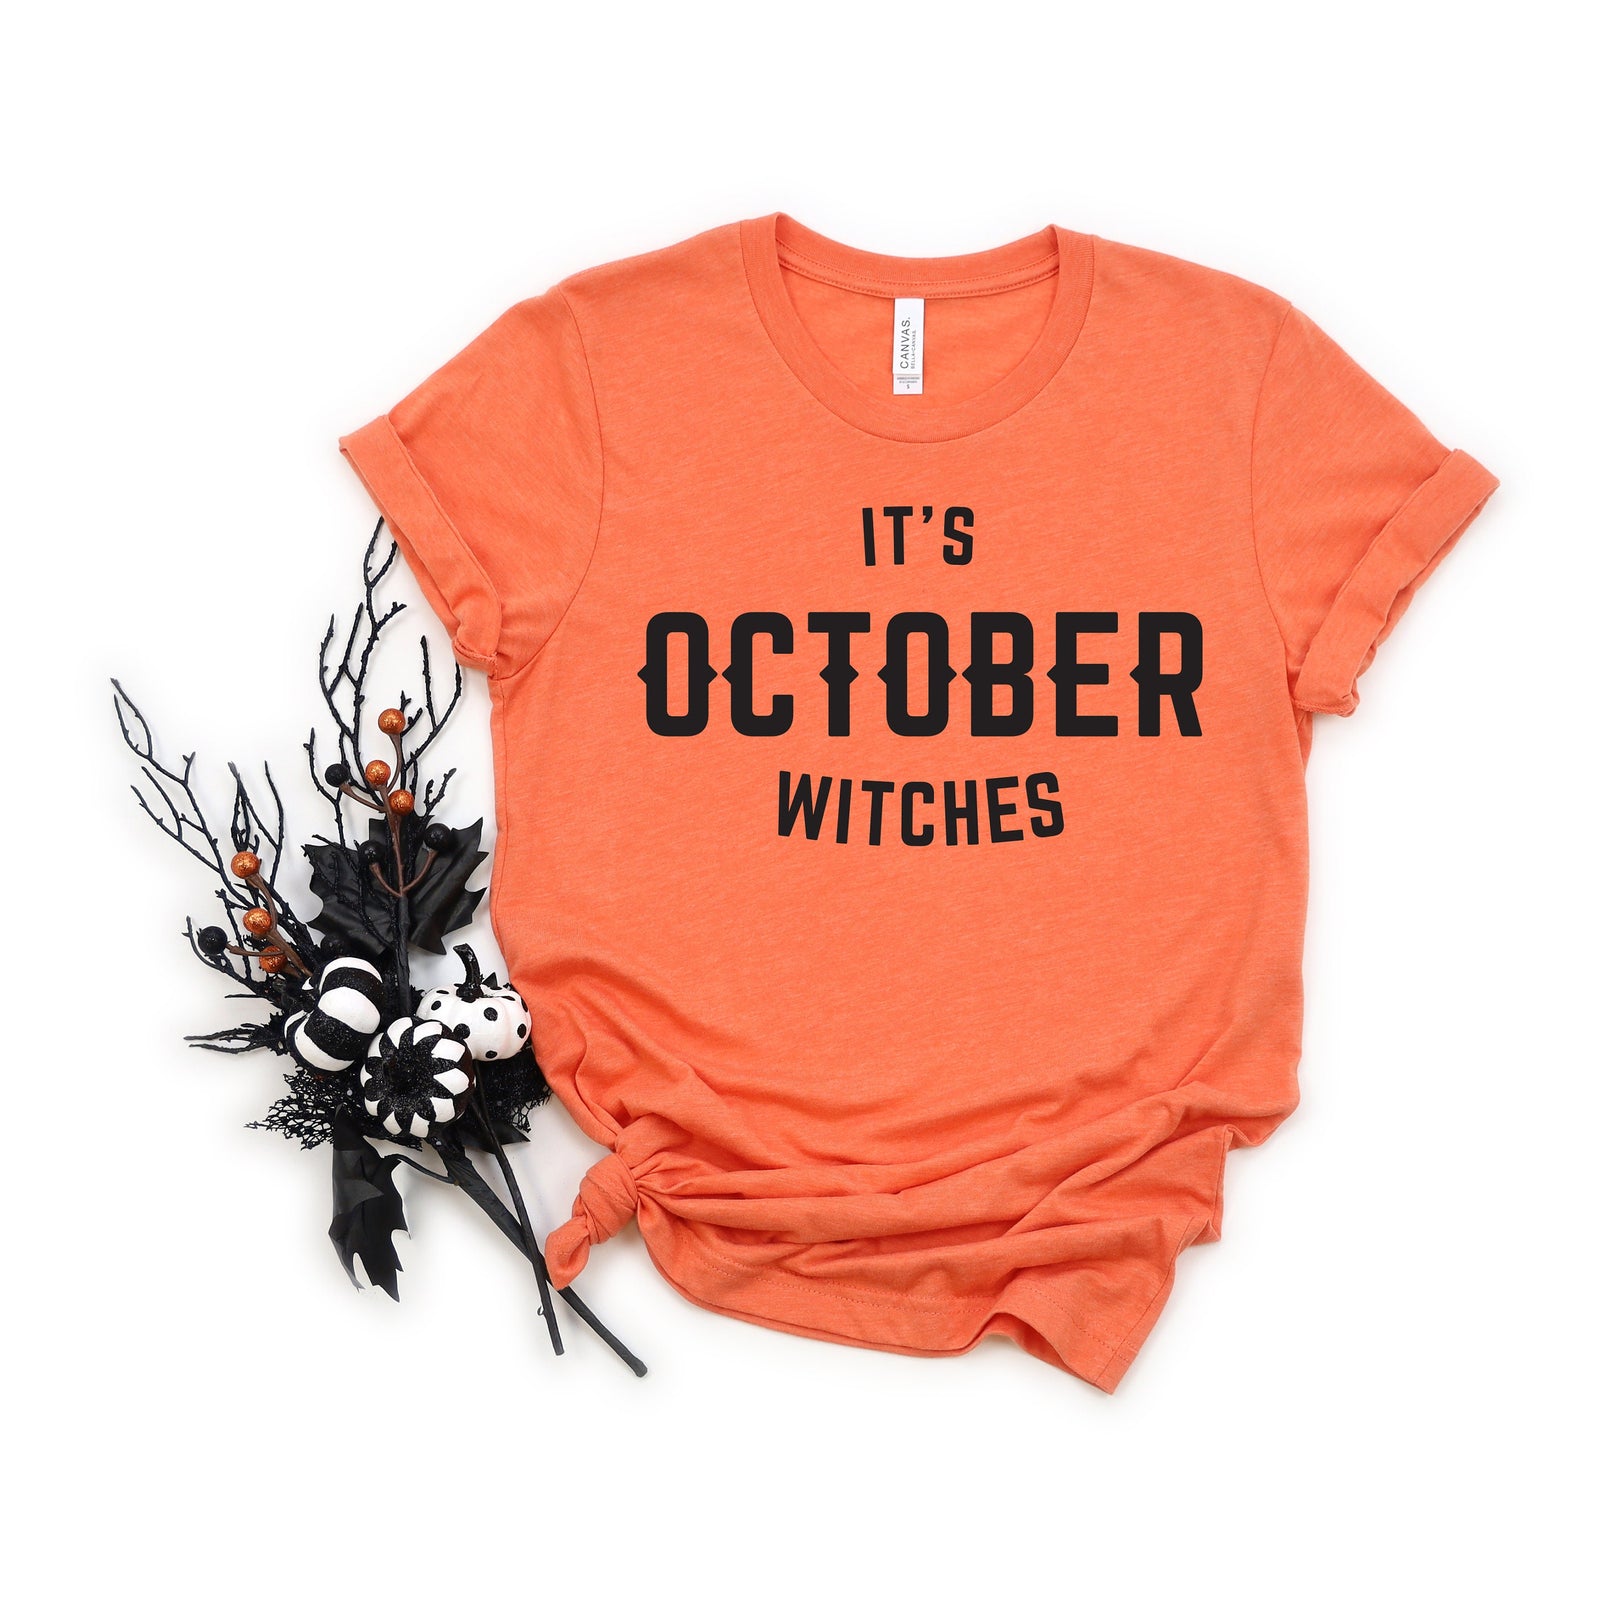 It's October Witches Adult Unisex T Shirt - Halloween - Funny Not So Scary Shirts